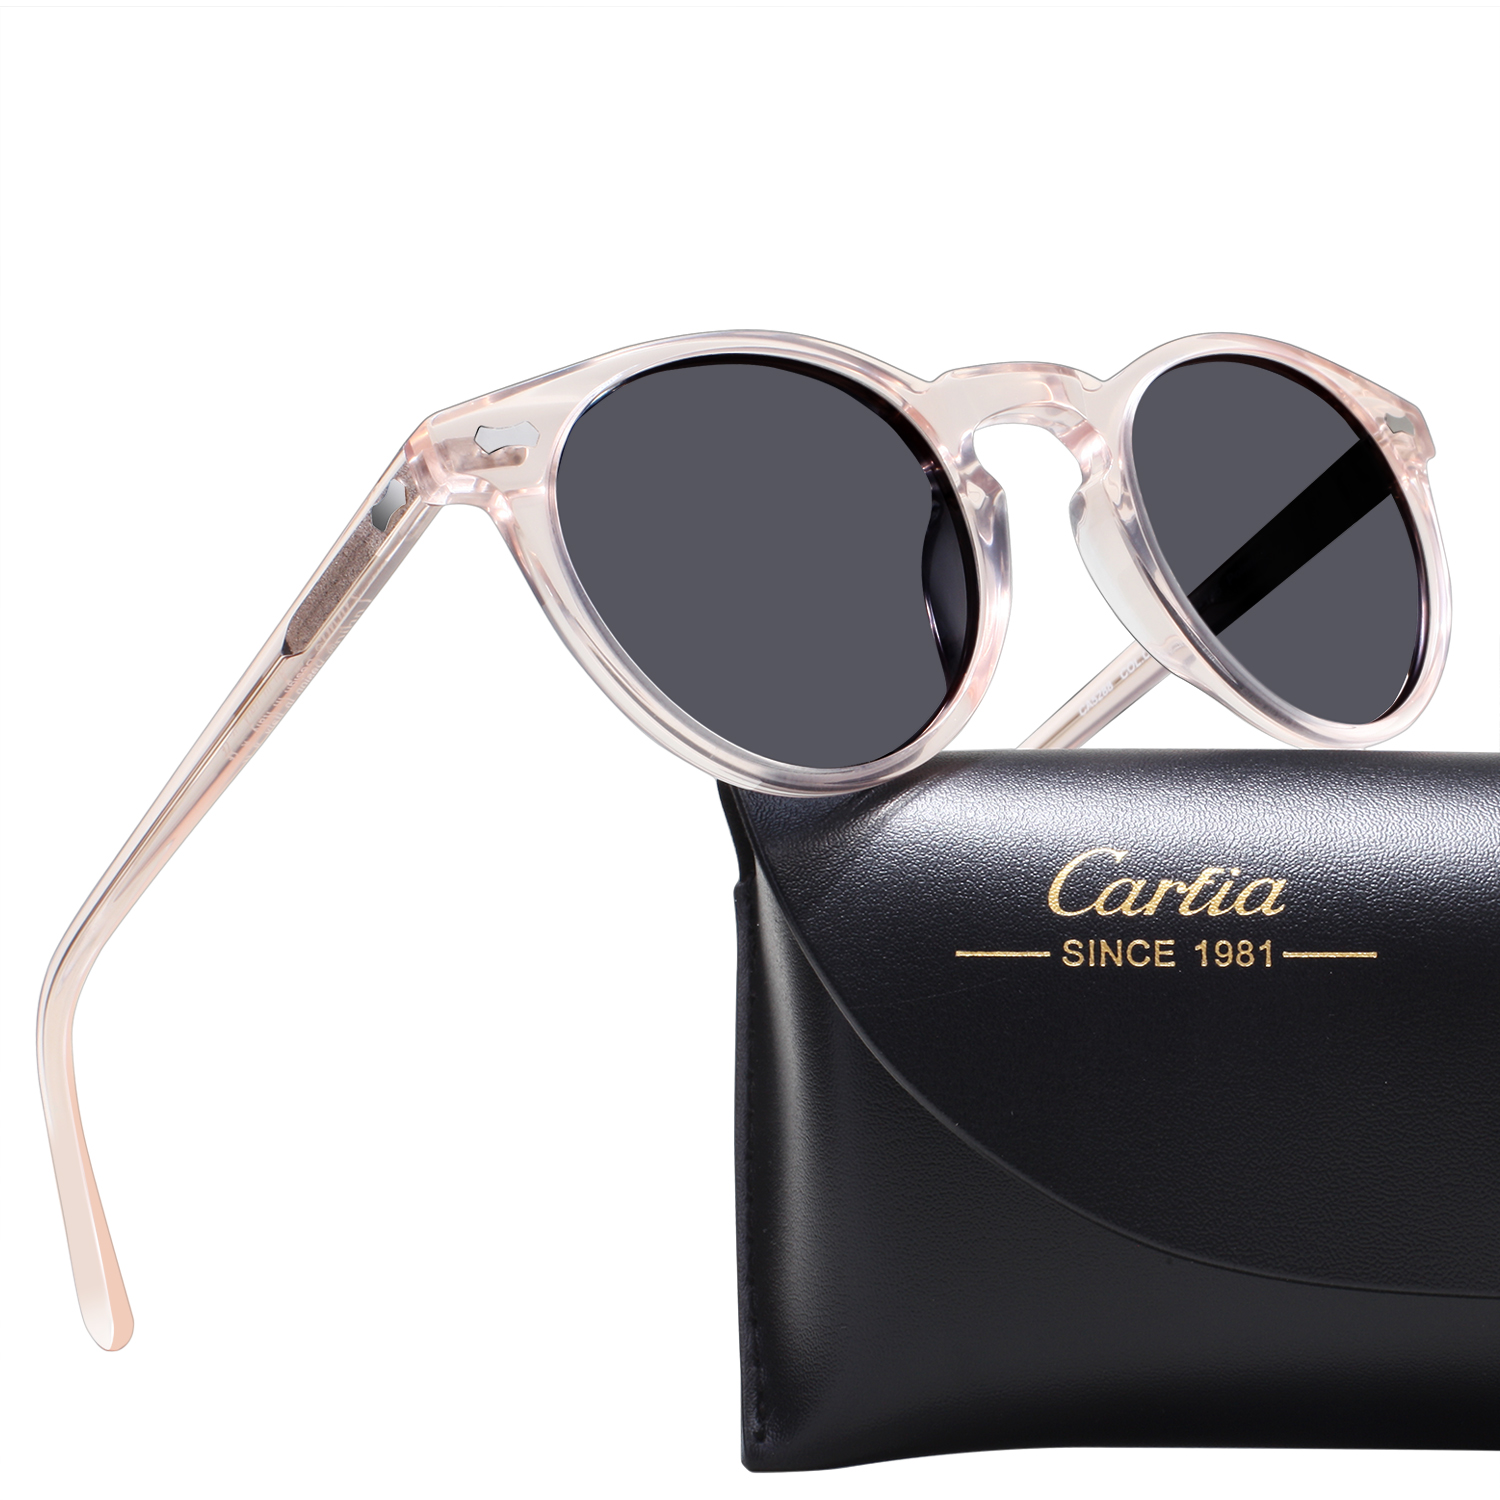 carfia Polarized sunglasses for women 5288 oval Round frame sun glasses UV 400 protection acatate resin glasses with box